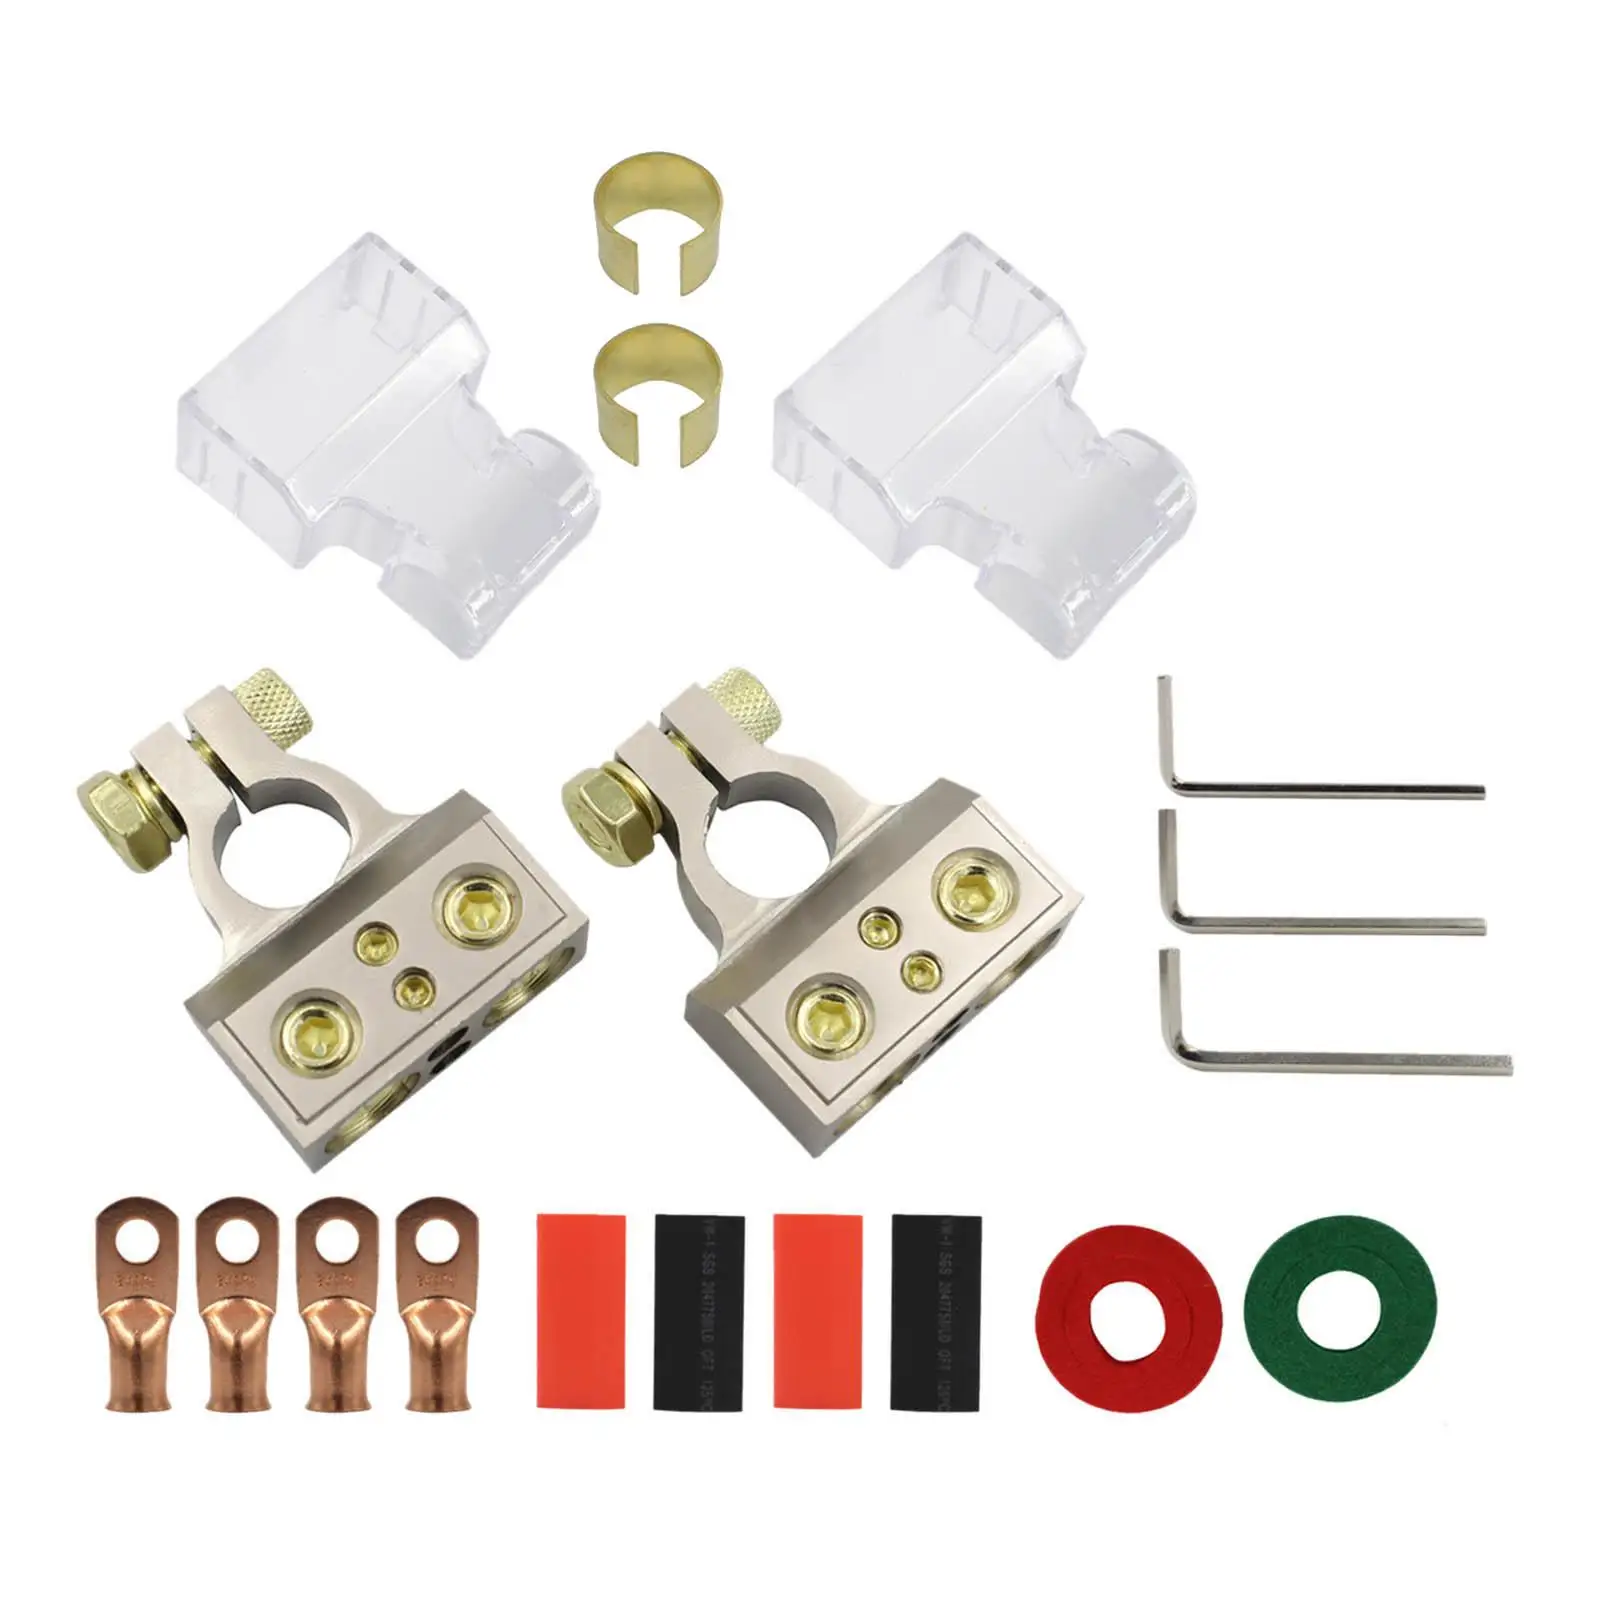 Car Battery Terminals Connectors Clamps Heavy Duty Universal Top Post Battery Terminals Protector Set for Boat Truck Camper